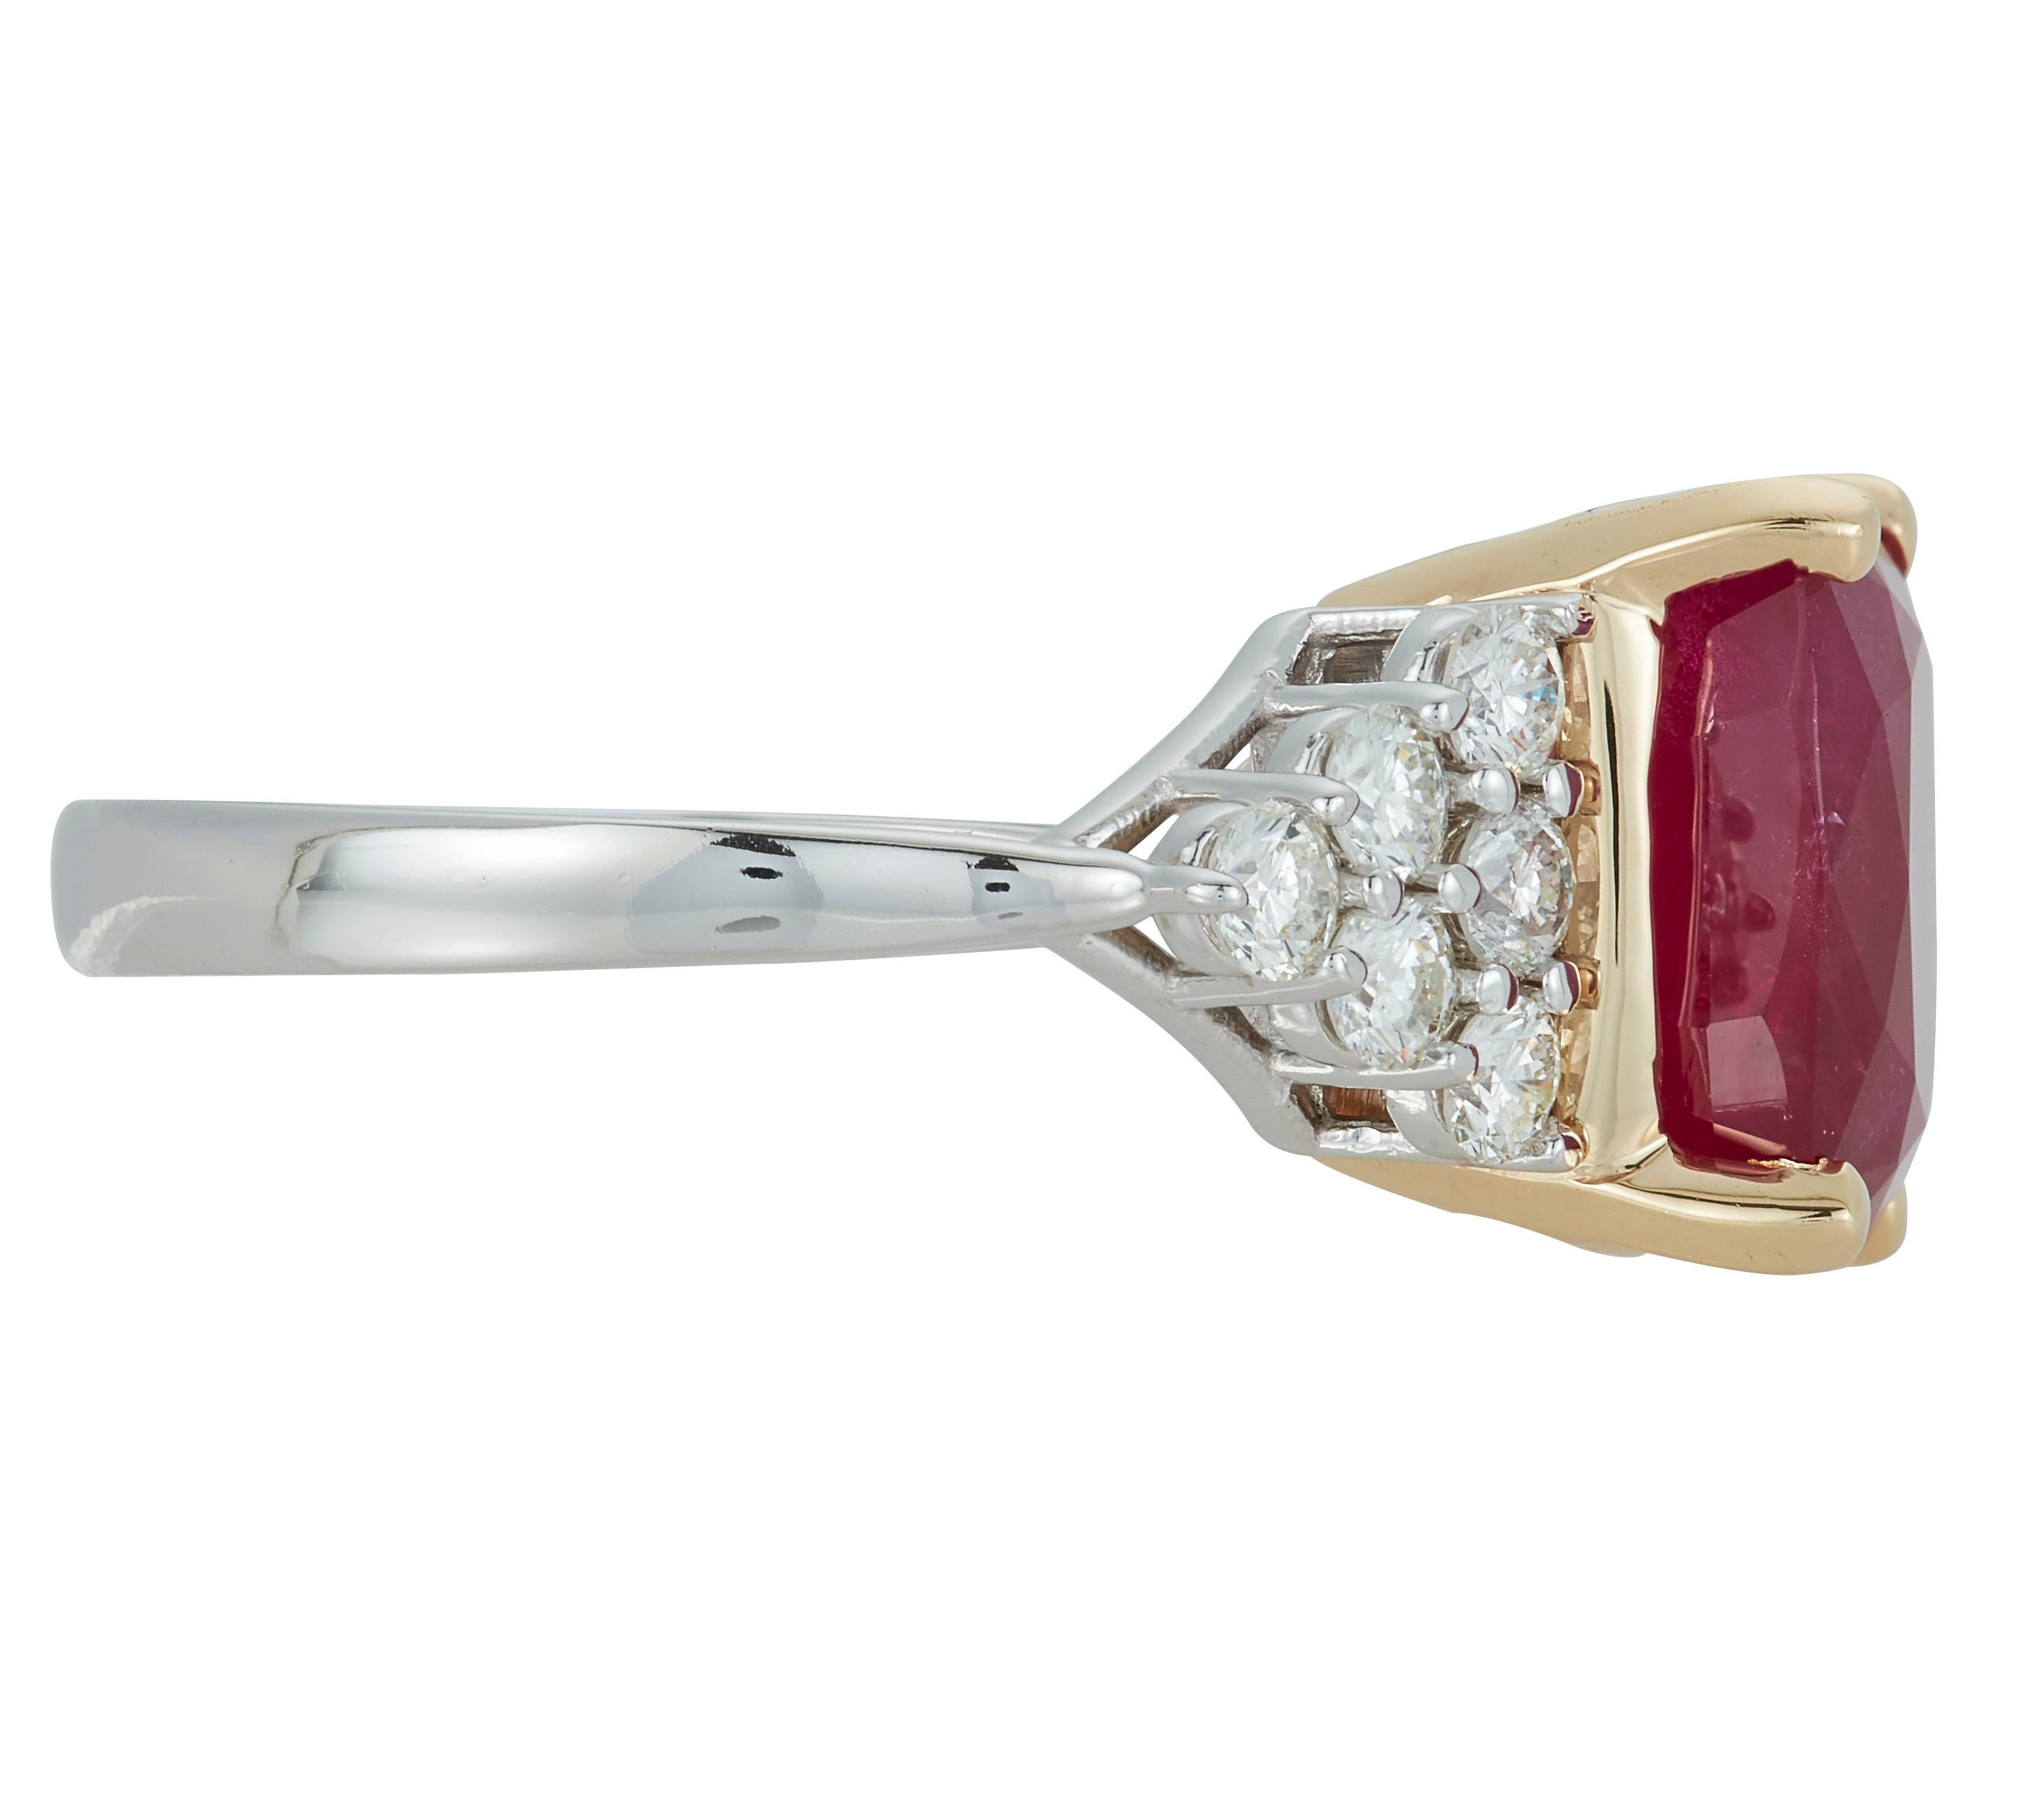 14K Two Tone
1  Cushion Cut Ruby at 6.55 Carats
32 Brilliant Round White Diamonds at 0.72 Carats - Color: H-I /Clarity: SI

Alberto offers complimentary sizing on all rings.

Fine one-of-a-kind craftsmanship meets incredible quality in this